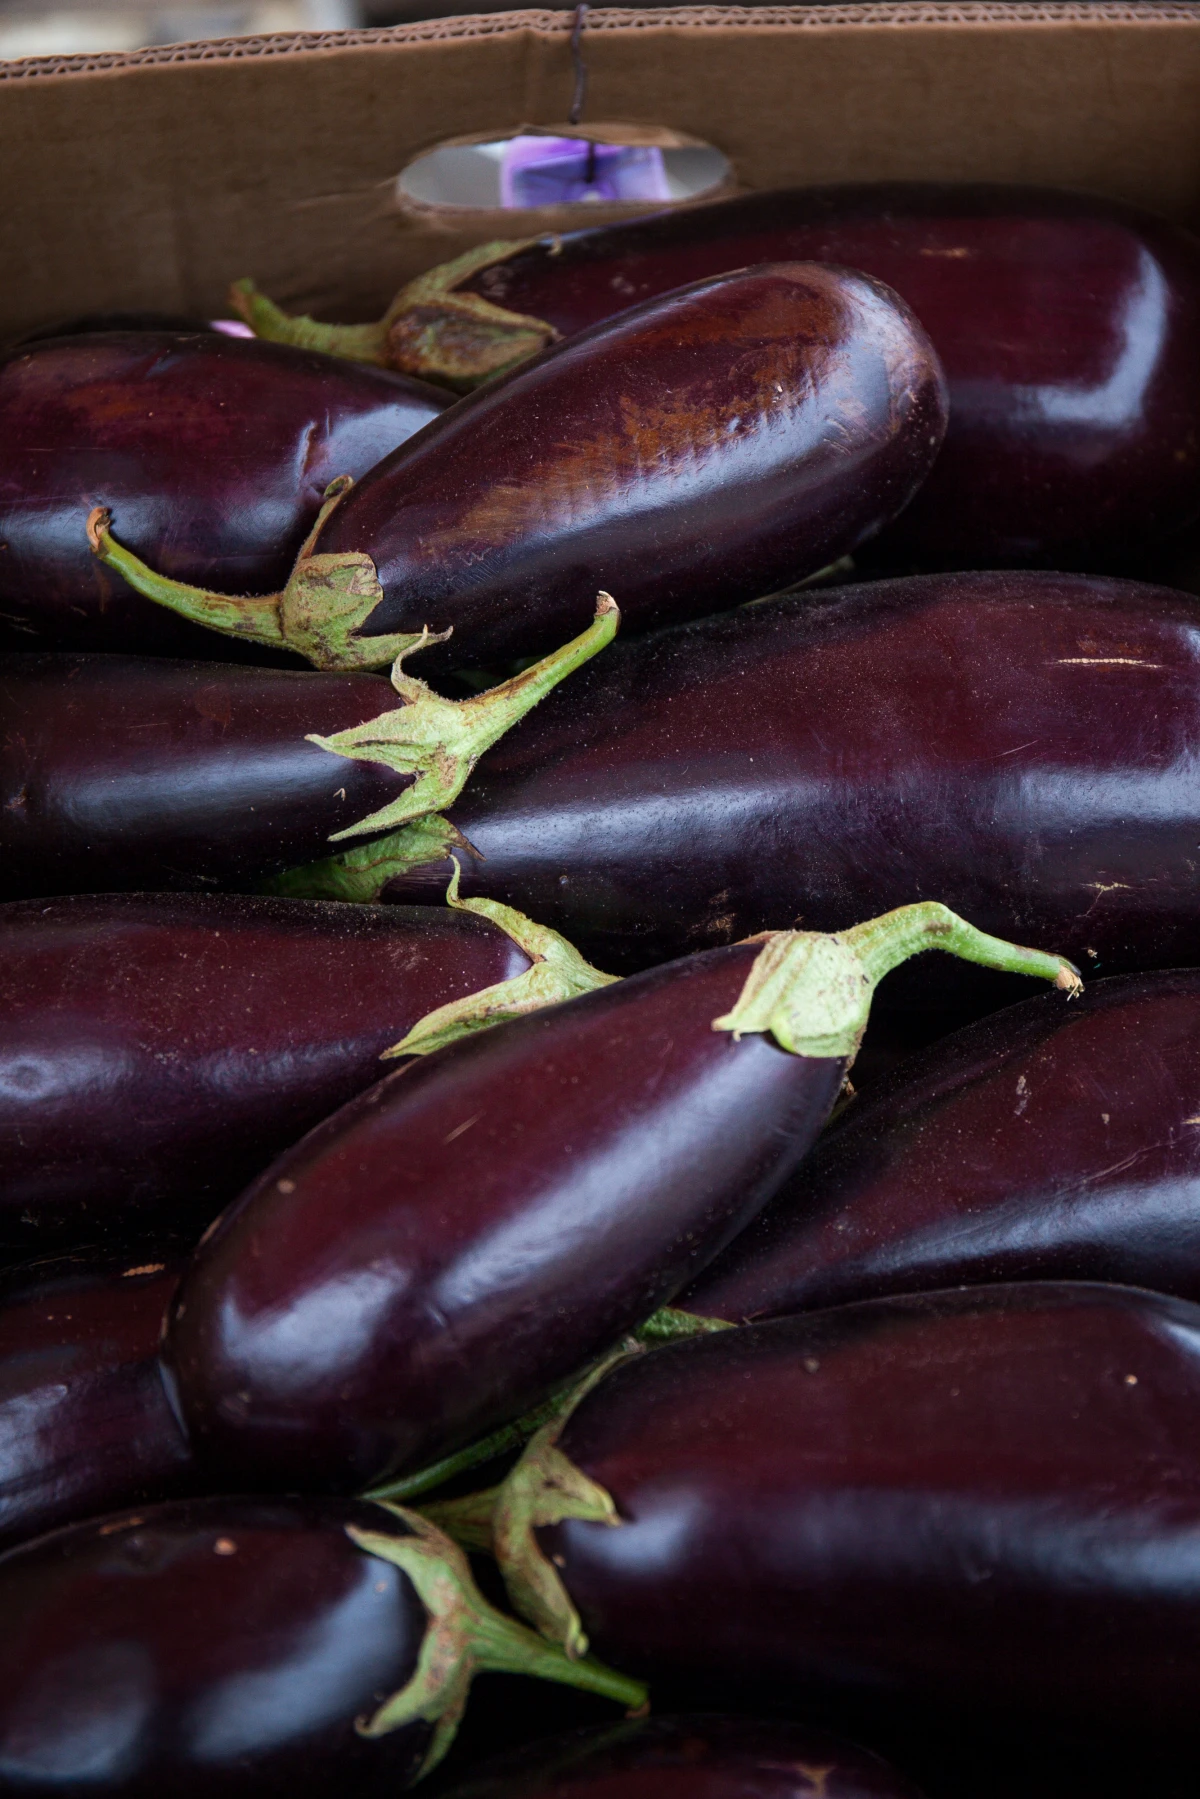 many eggplants in one picture